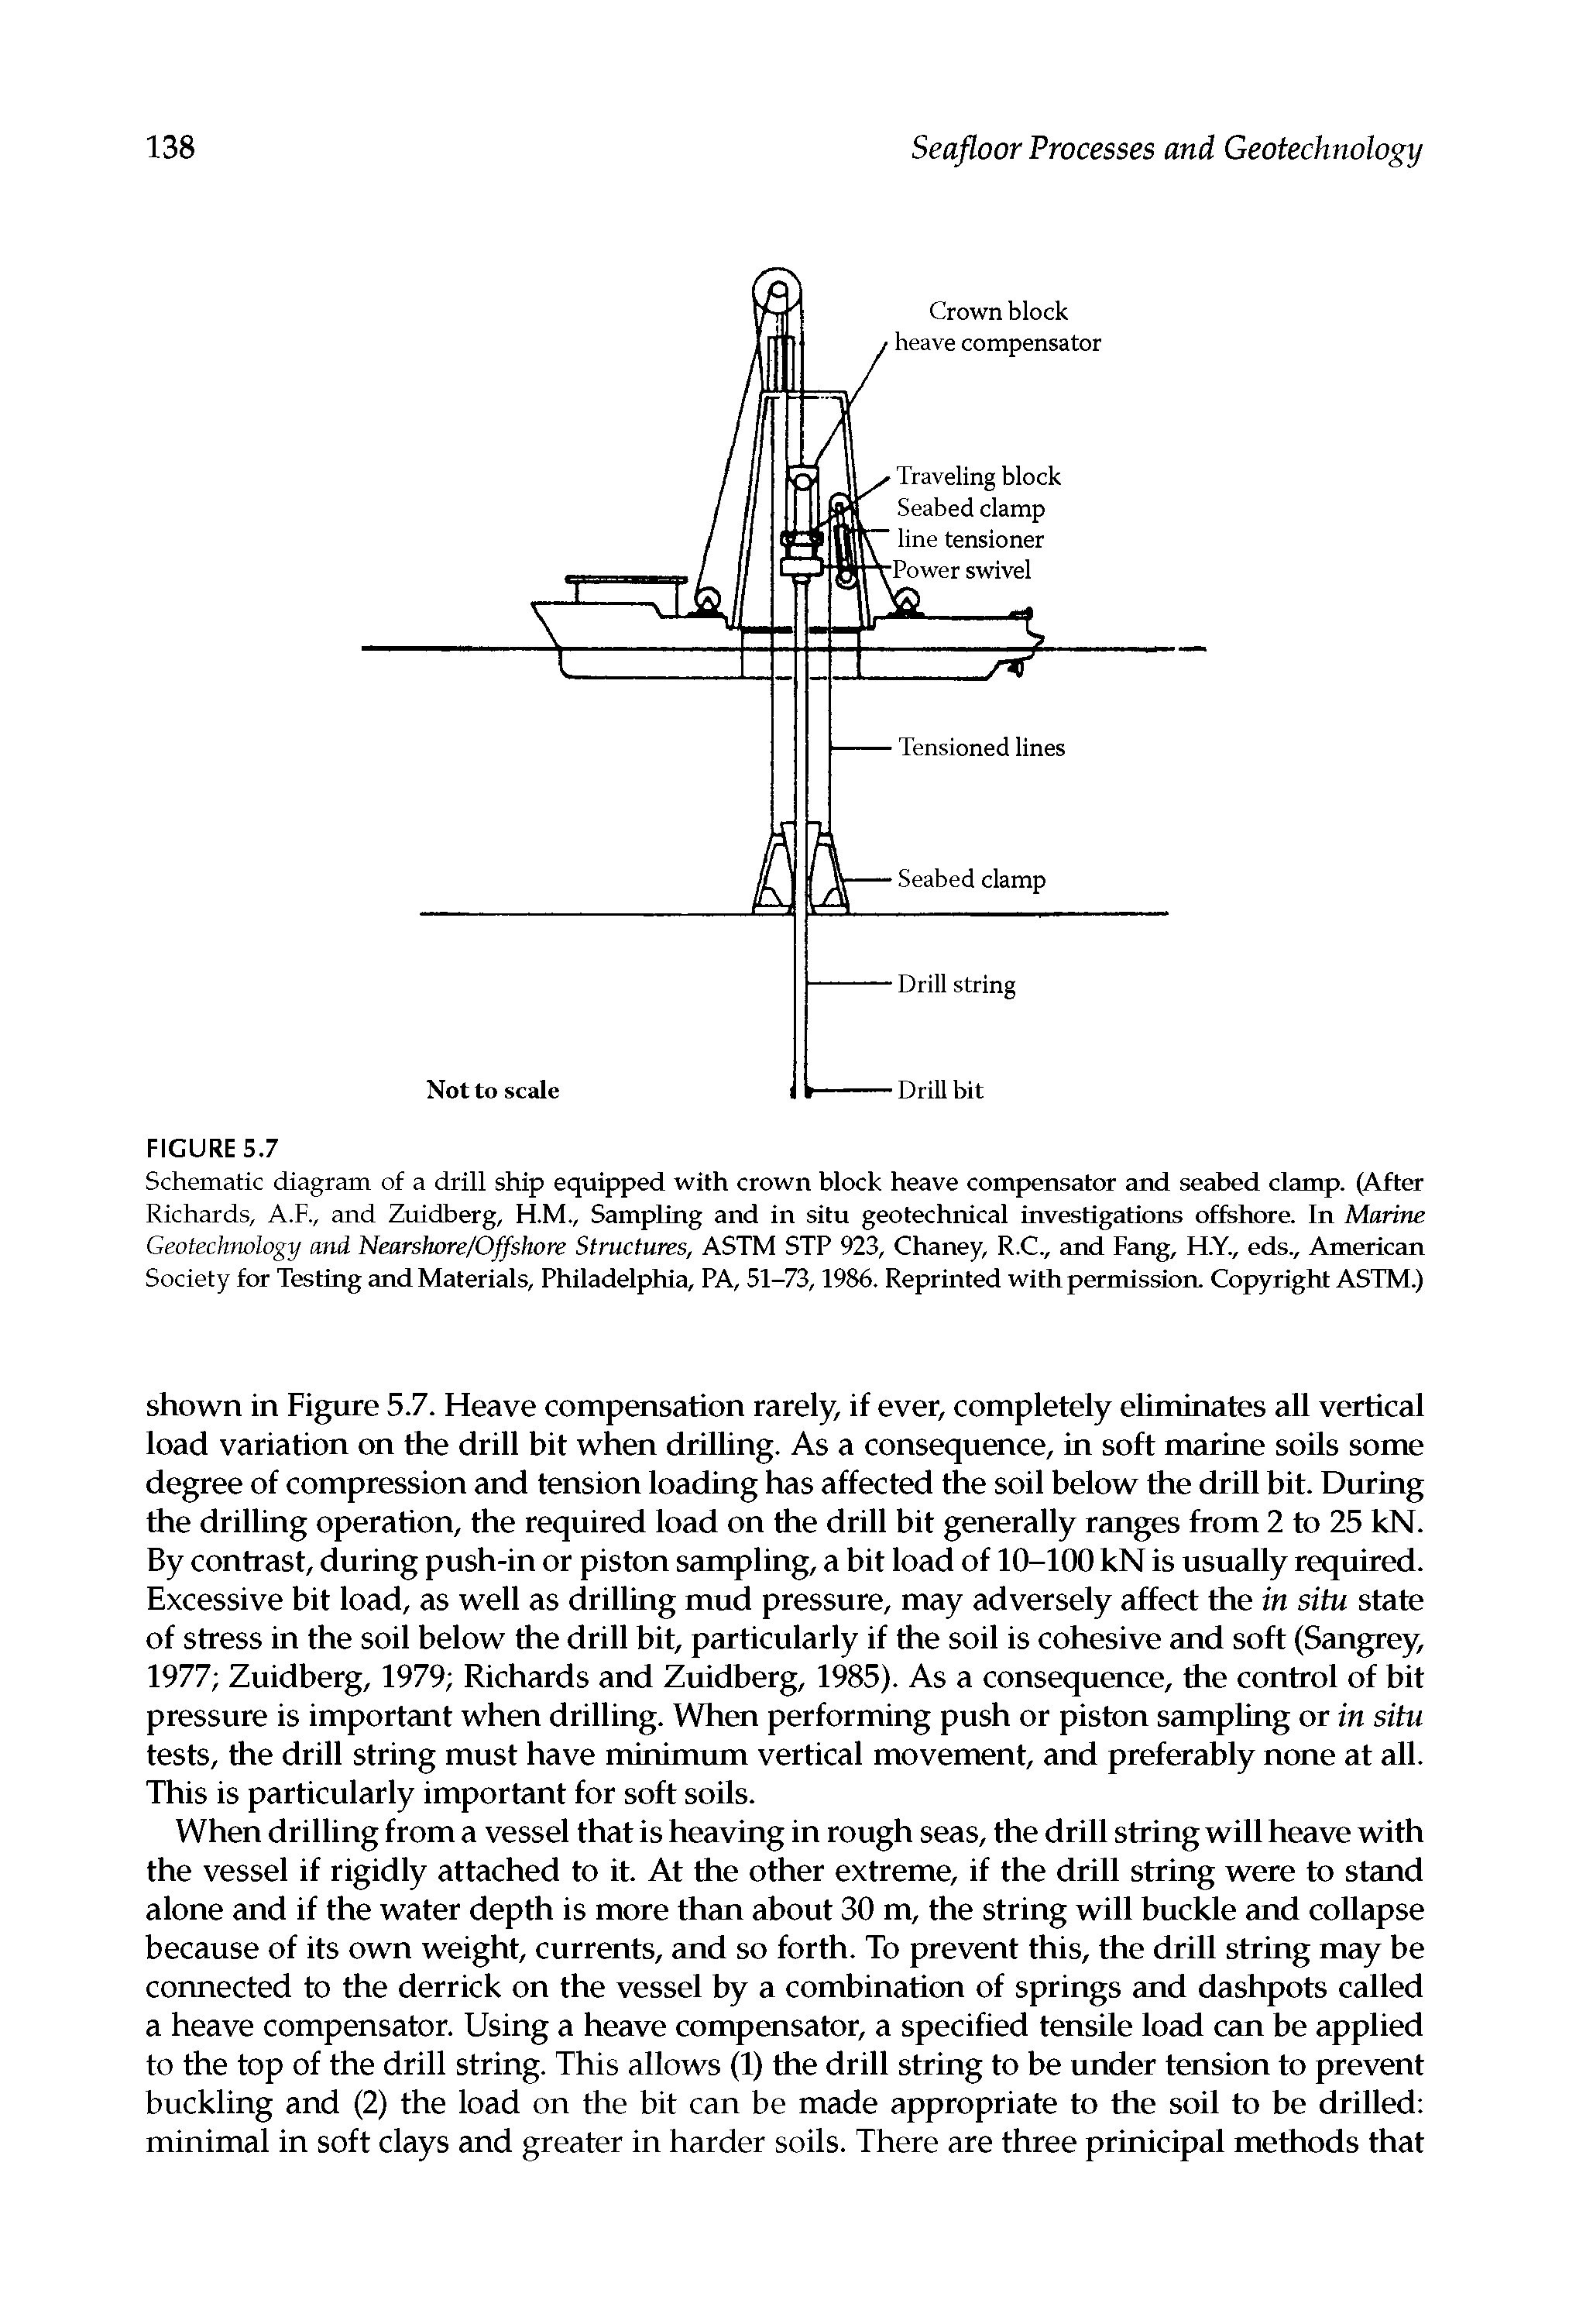 Schematic diagram of a drill ship equipped with crown block heave compensator and seabed clamp. (After Richards, A.F., and Zuidberg, H.M., Sampling and in situ geotechnical investigations offehore. In Marine Geotechnology and Nearshore/Offshore Structures, ASTM STP 923, Chaney, R.C., and Fang, H.Y., eds., American Society for Testing and Materials, Philadelphia, PA, 51-73,1986. Reprinted with permission. Copyright ASTM.)...